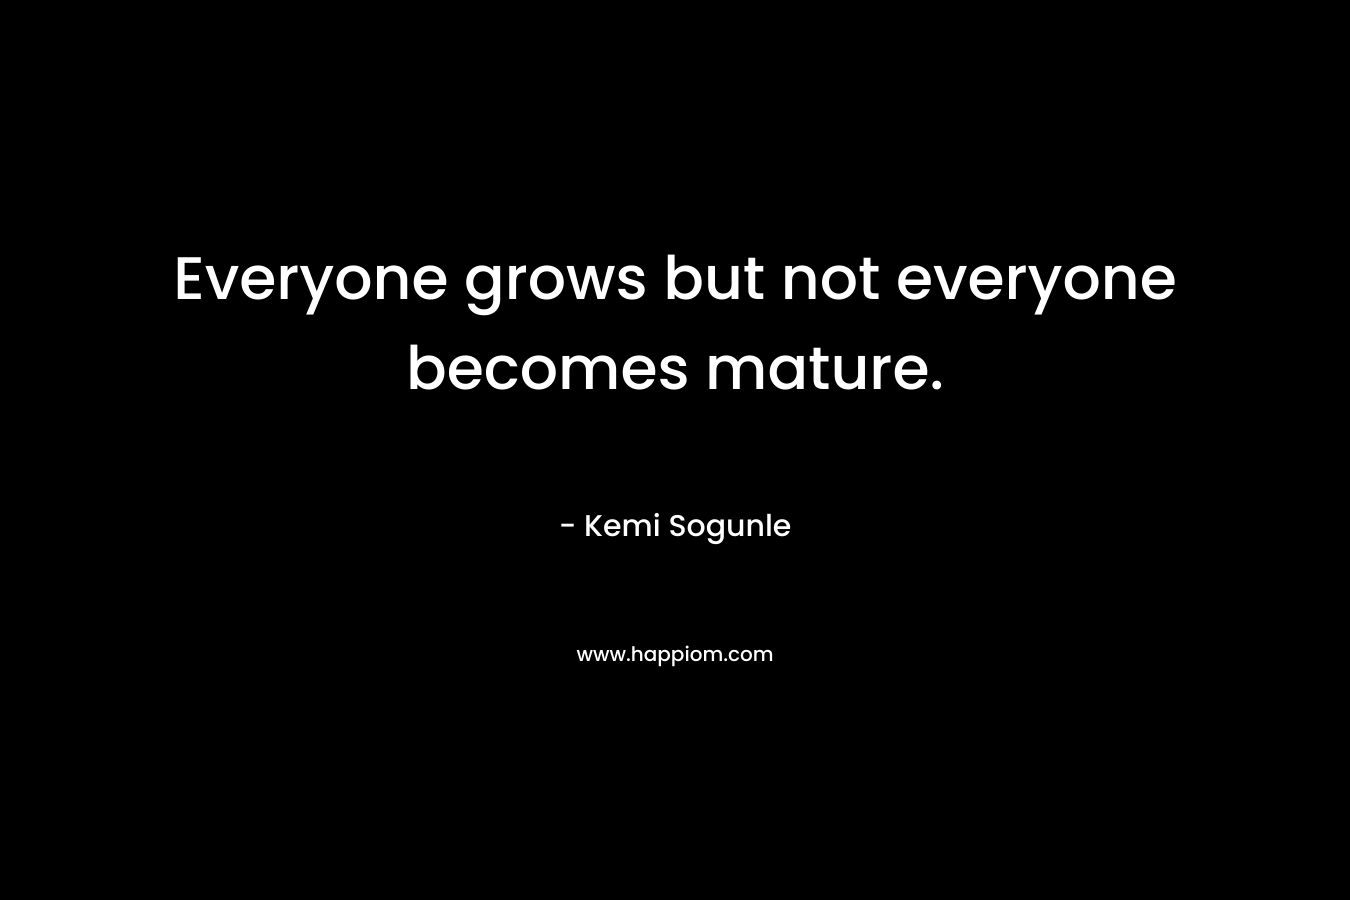 Everyone grows but not everyone becomes mature.